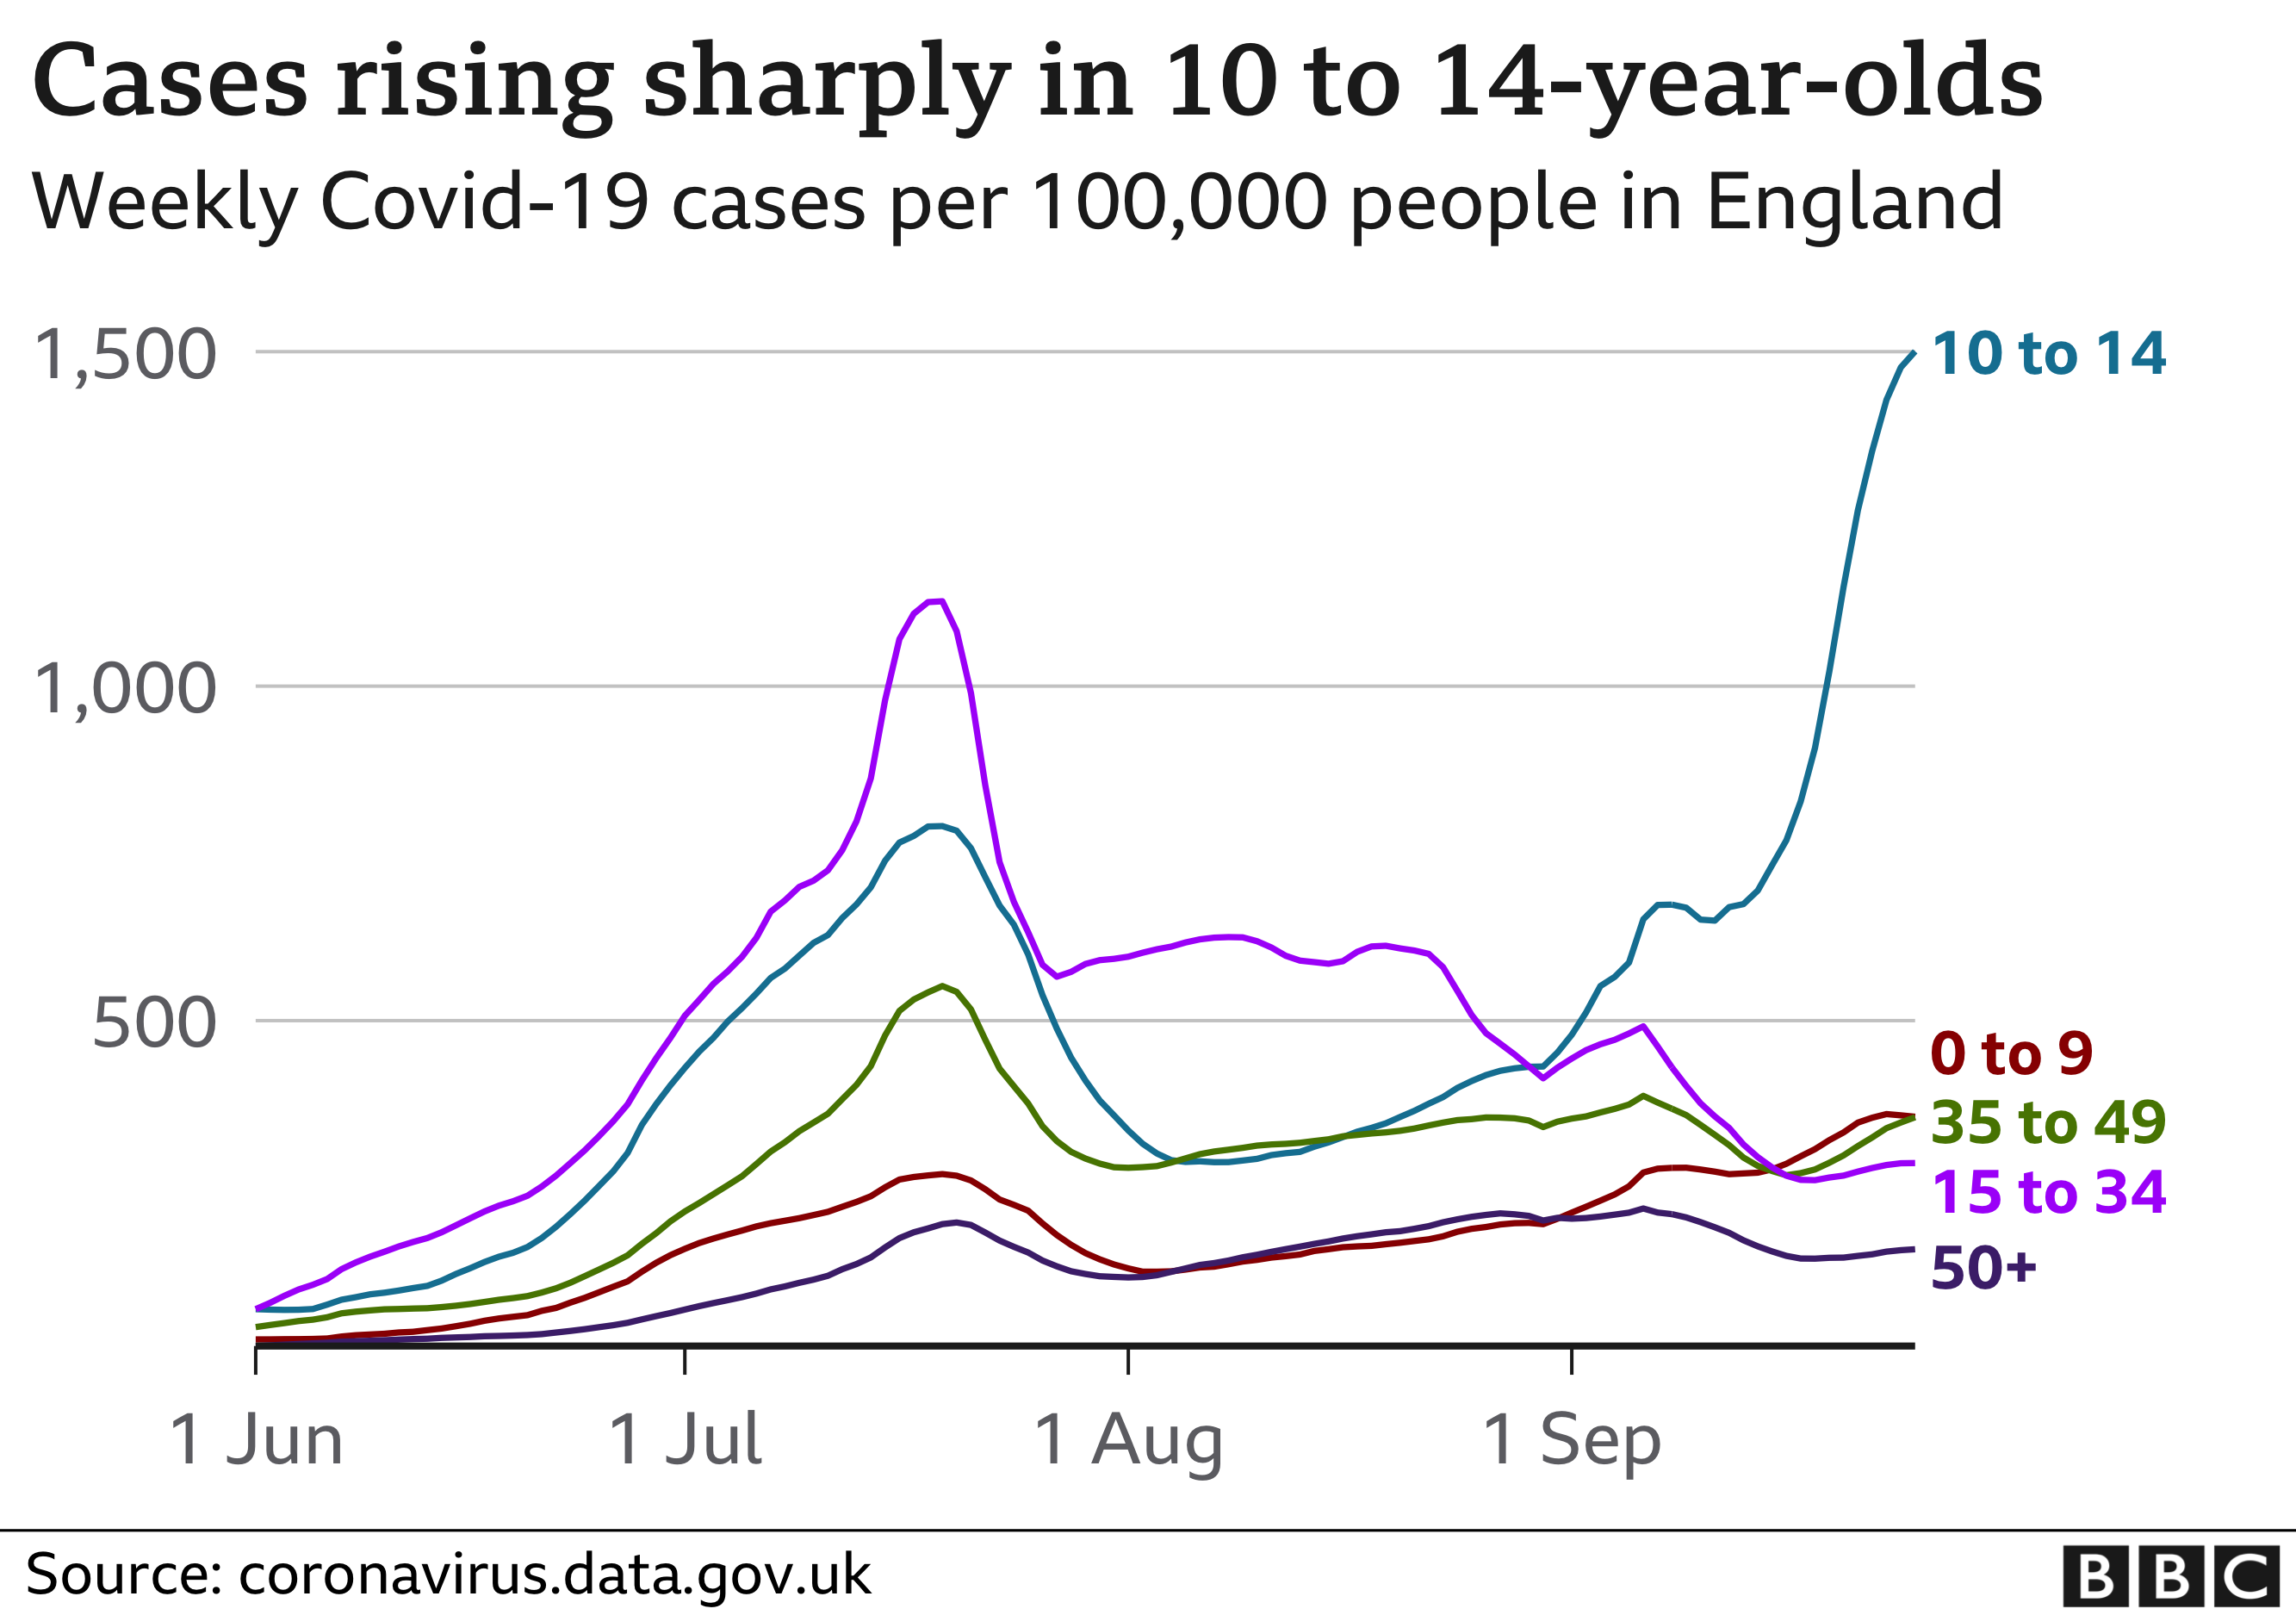 Cases rising sharply in 10-14 year olds